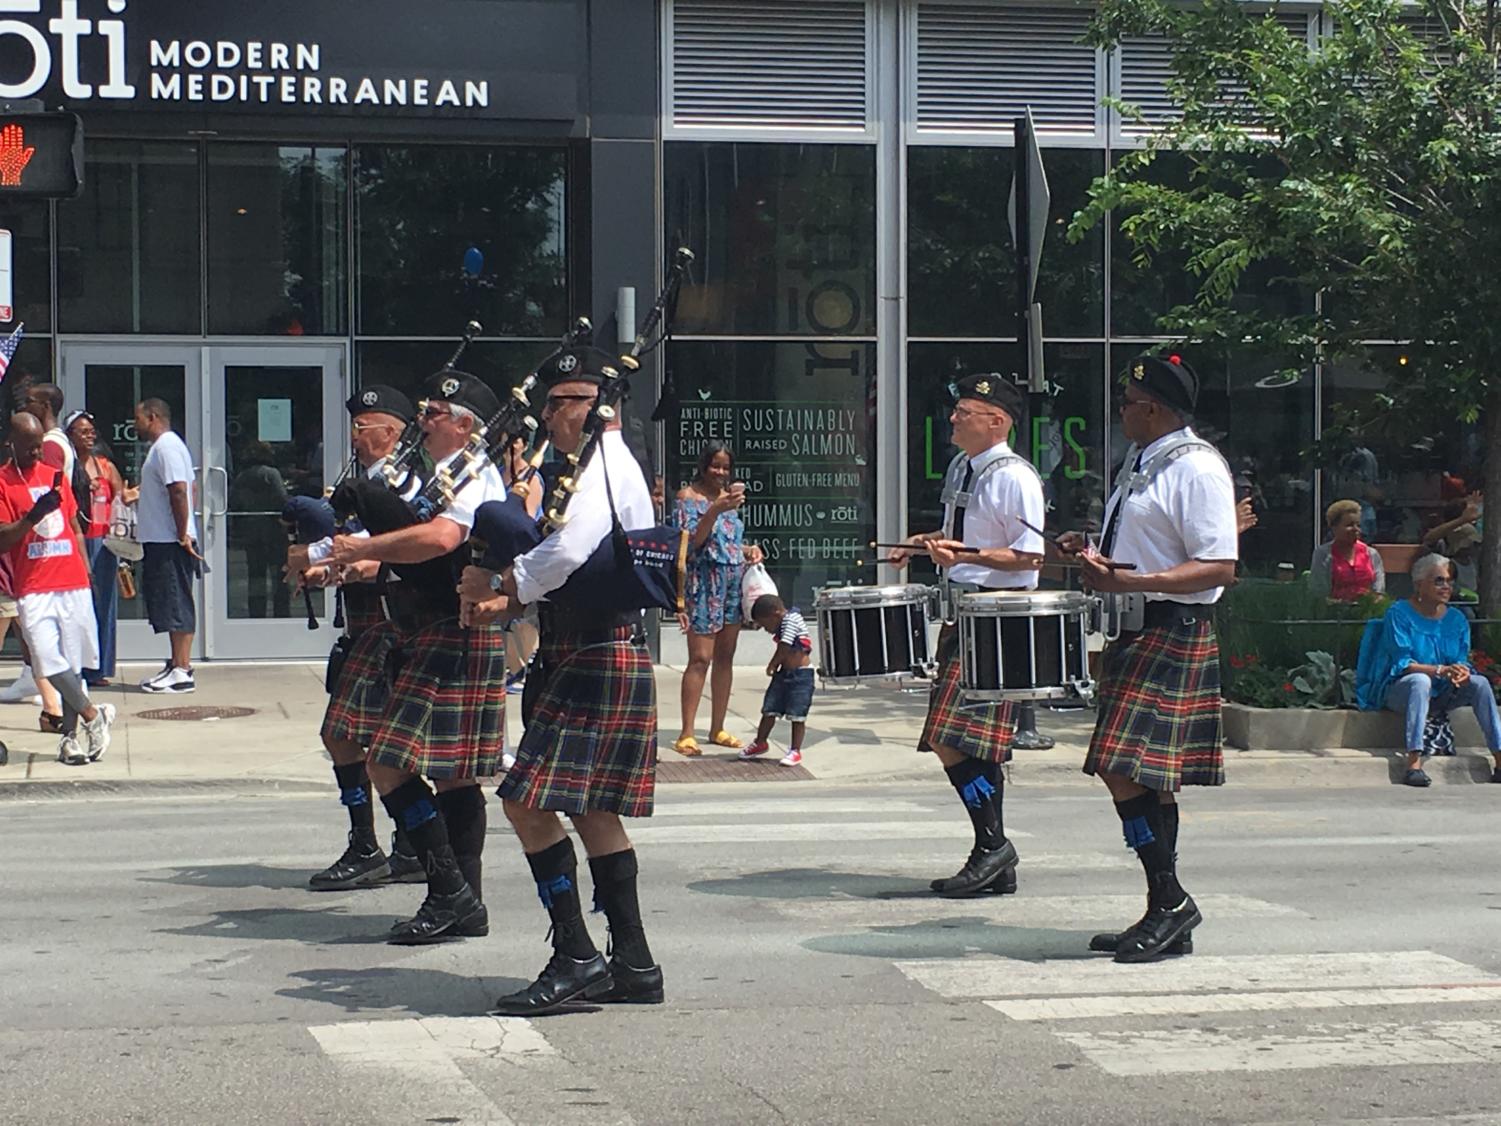 Bagpipers and a firetruck led the parade.